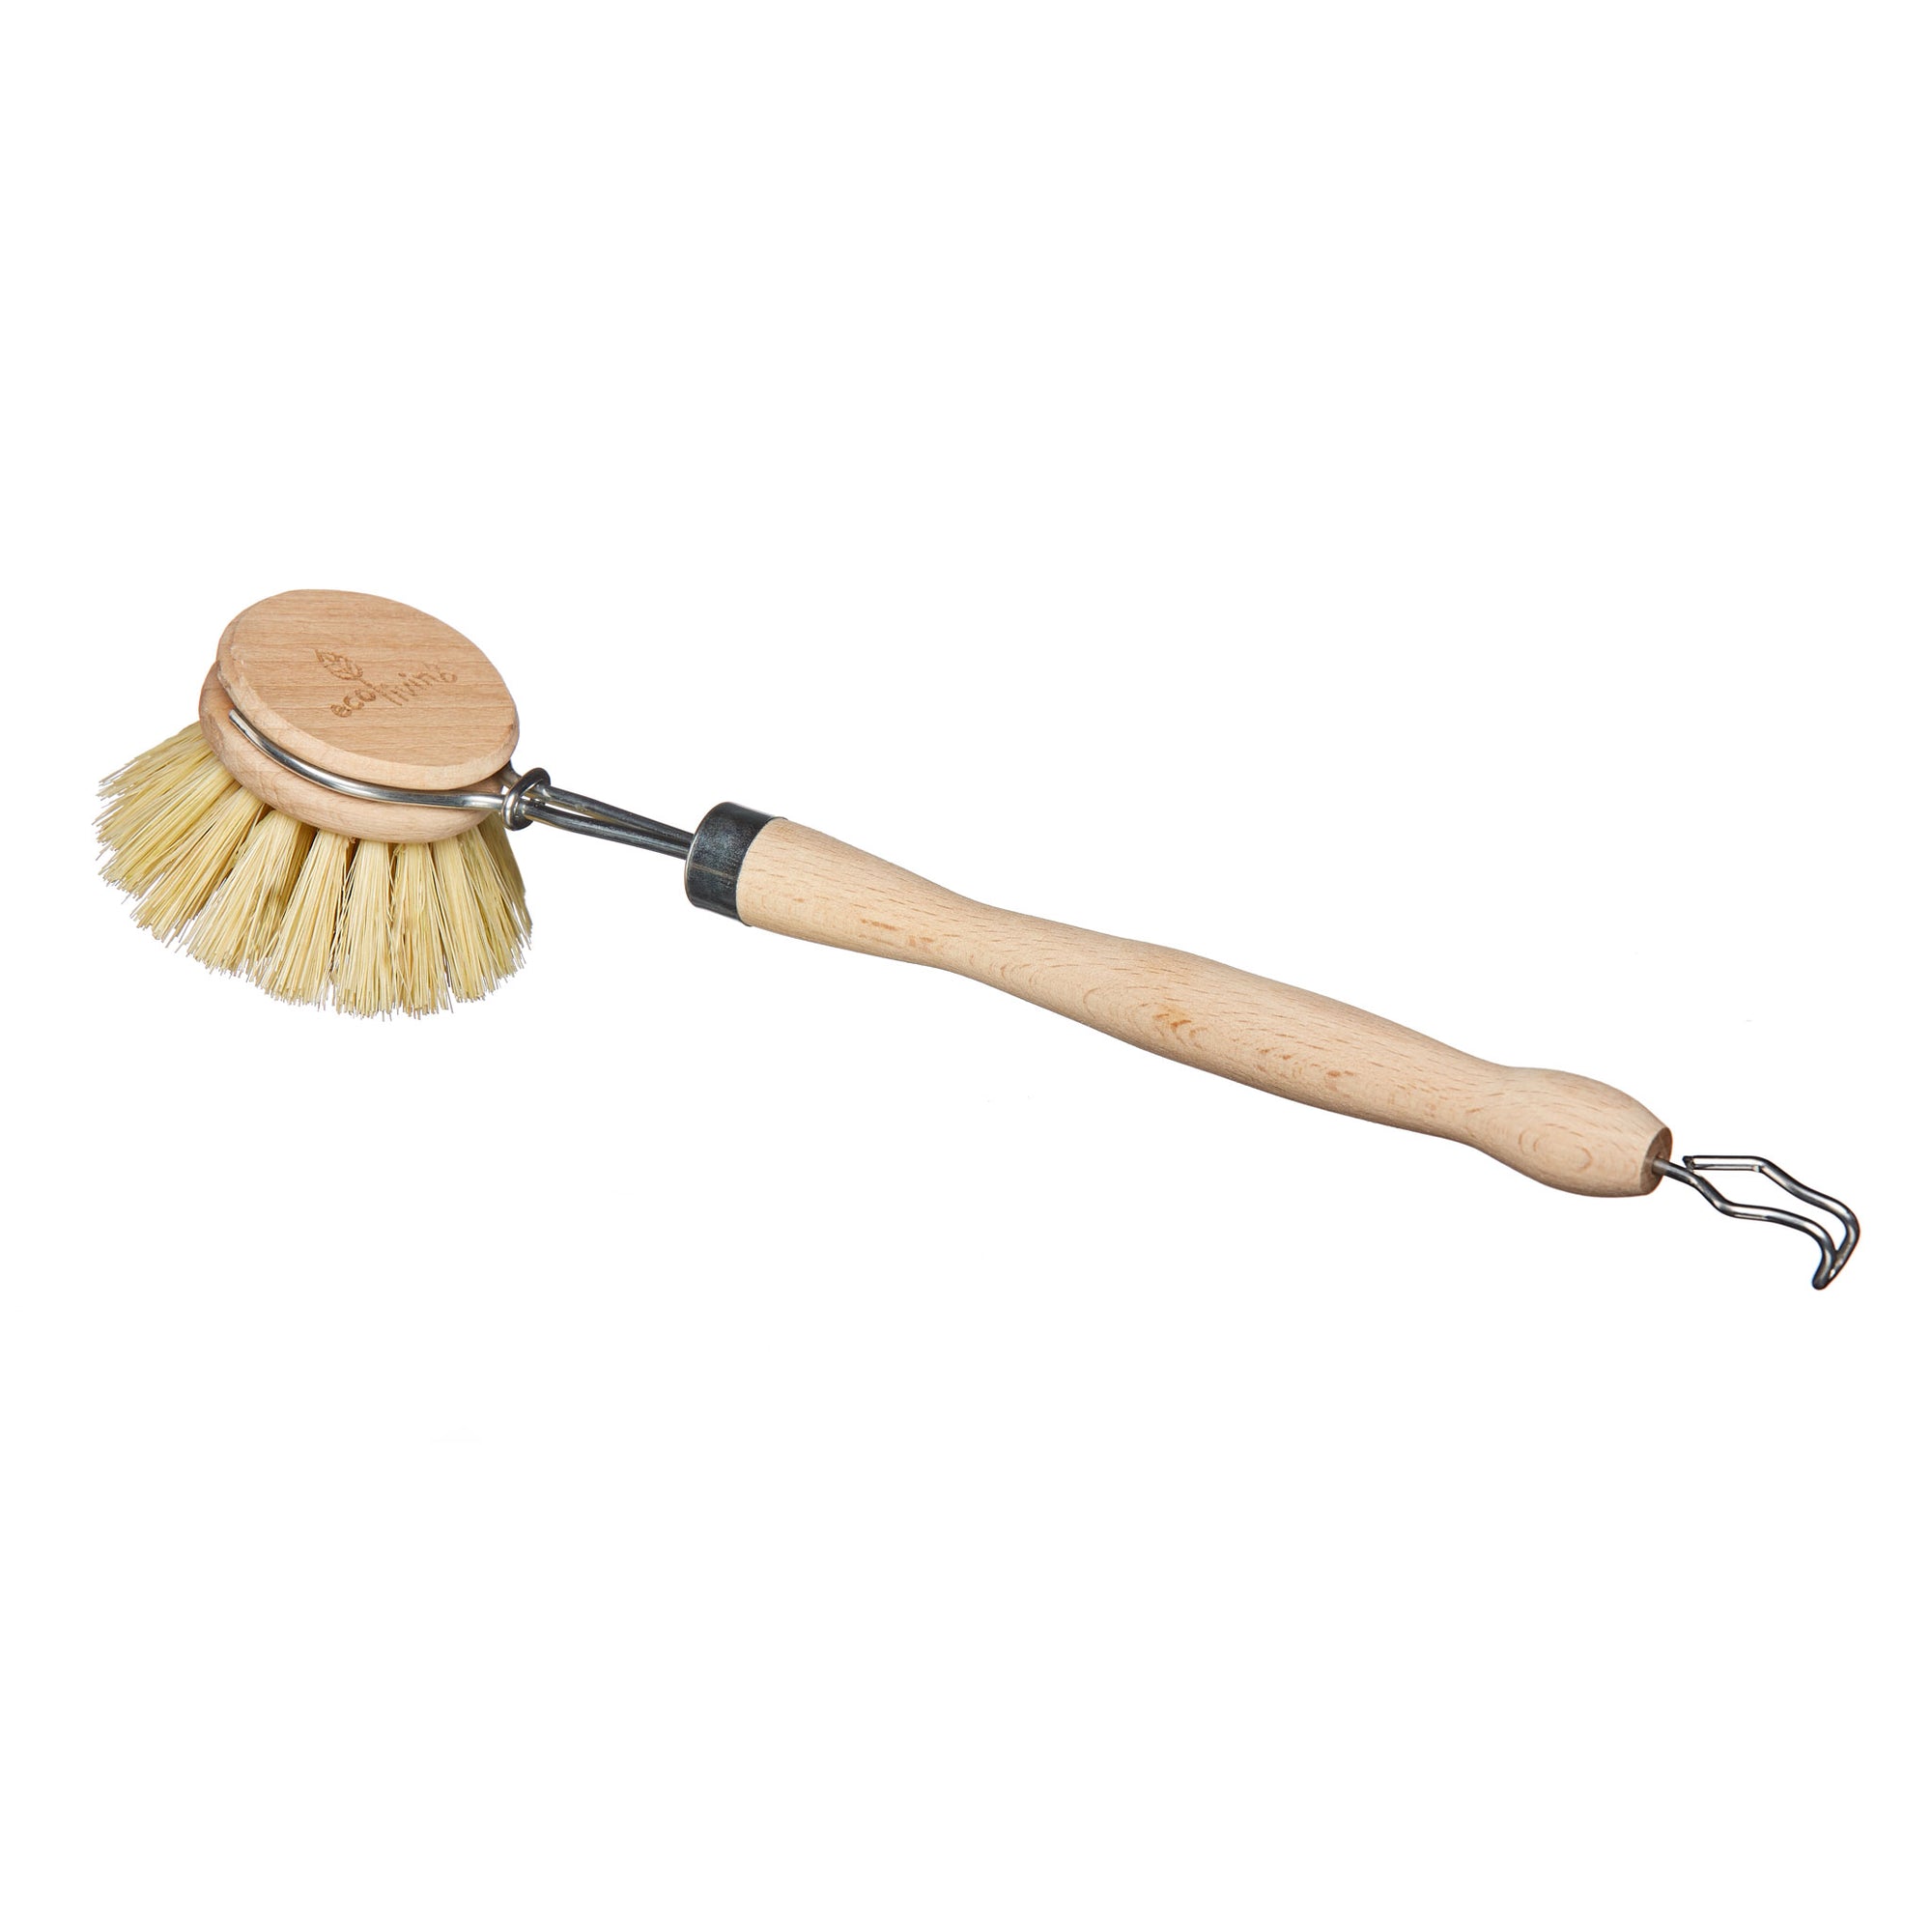 Wooden Washing Up Brush With Replaceable Head | Washing Up Brush - The Naughty Shrew